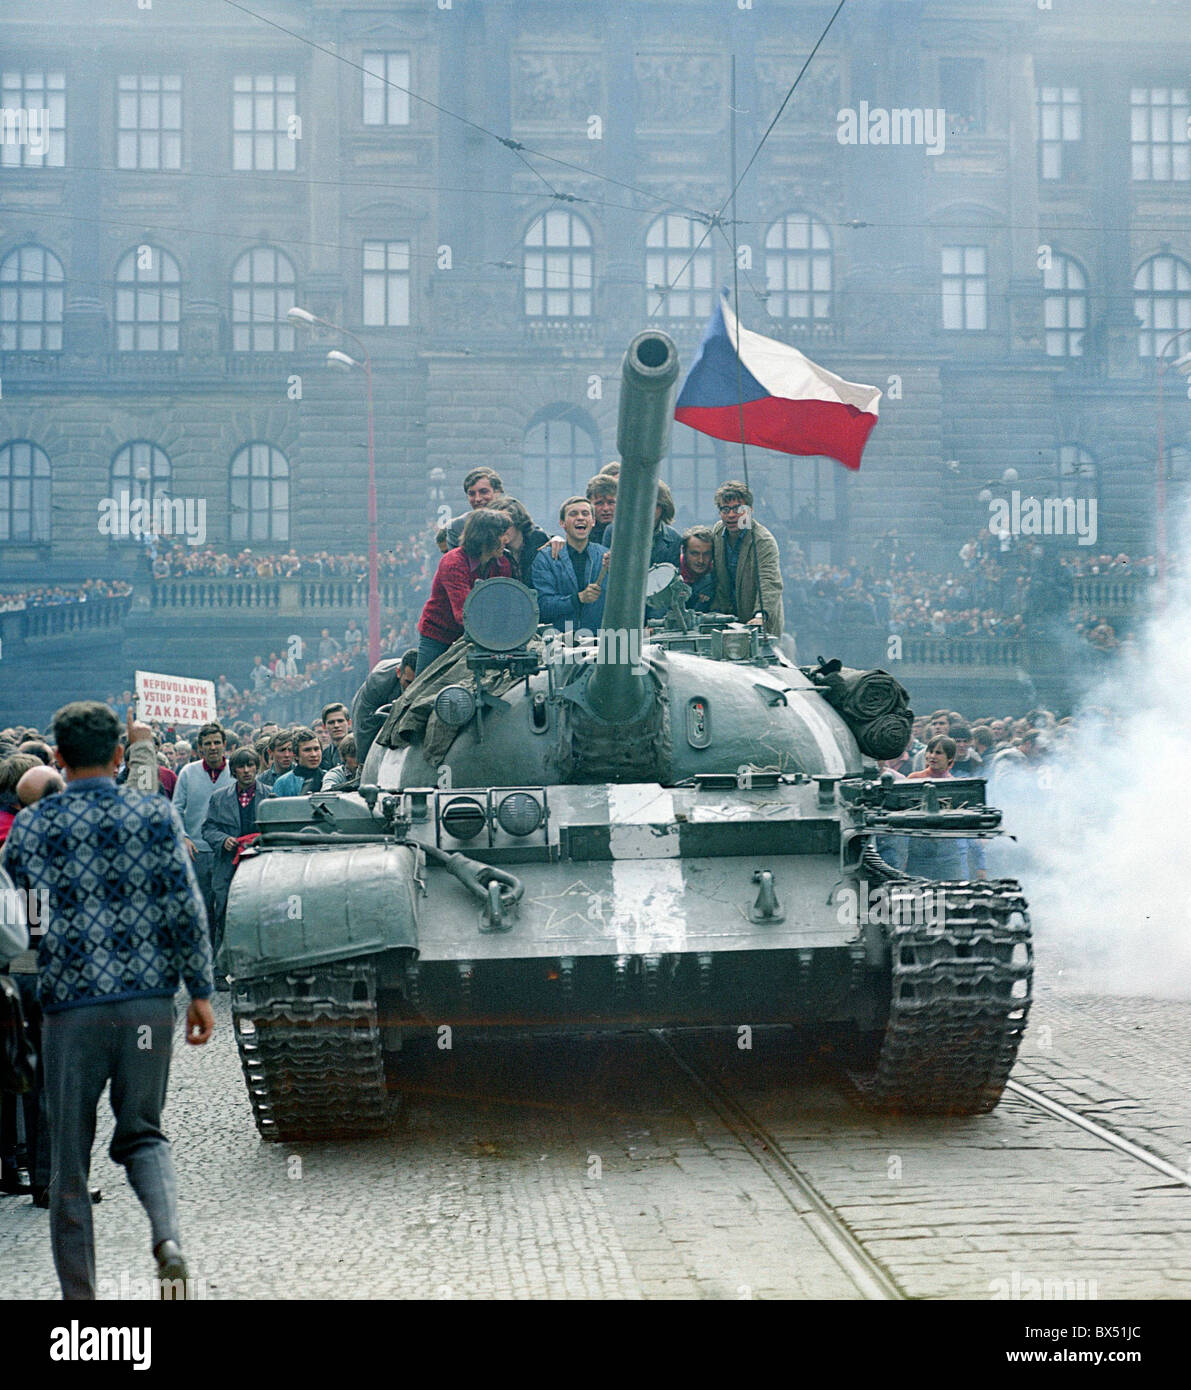 I just screenshotted a russian tank with soviet flag on it. This is at  Kiev! Jesus - 9GAG